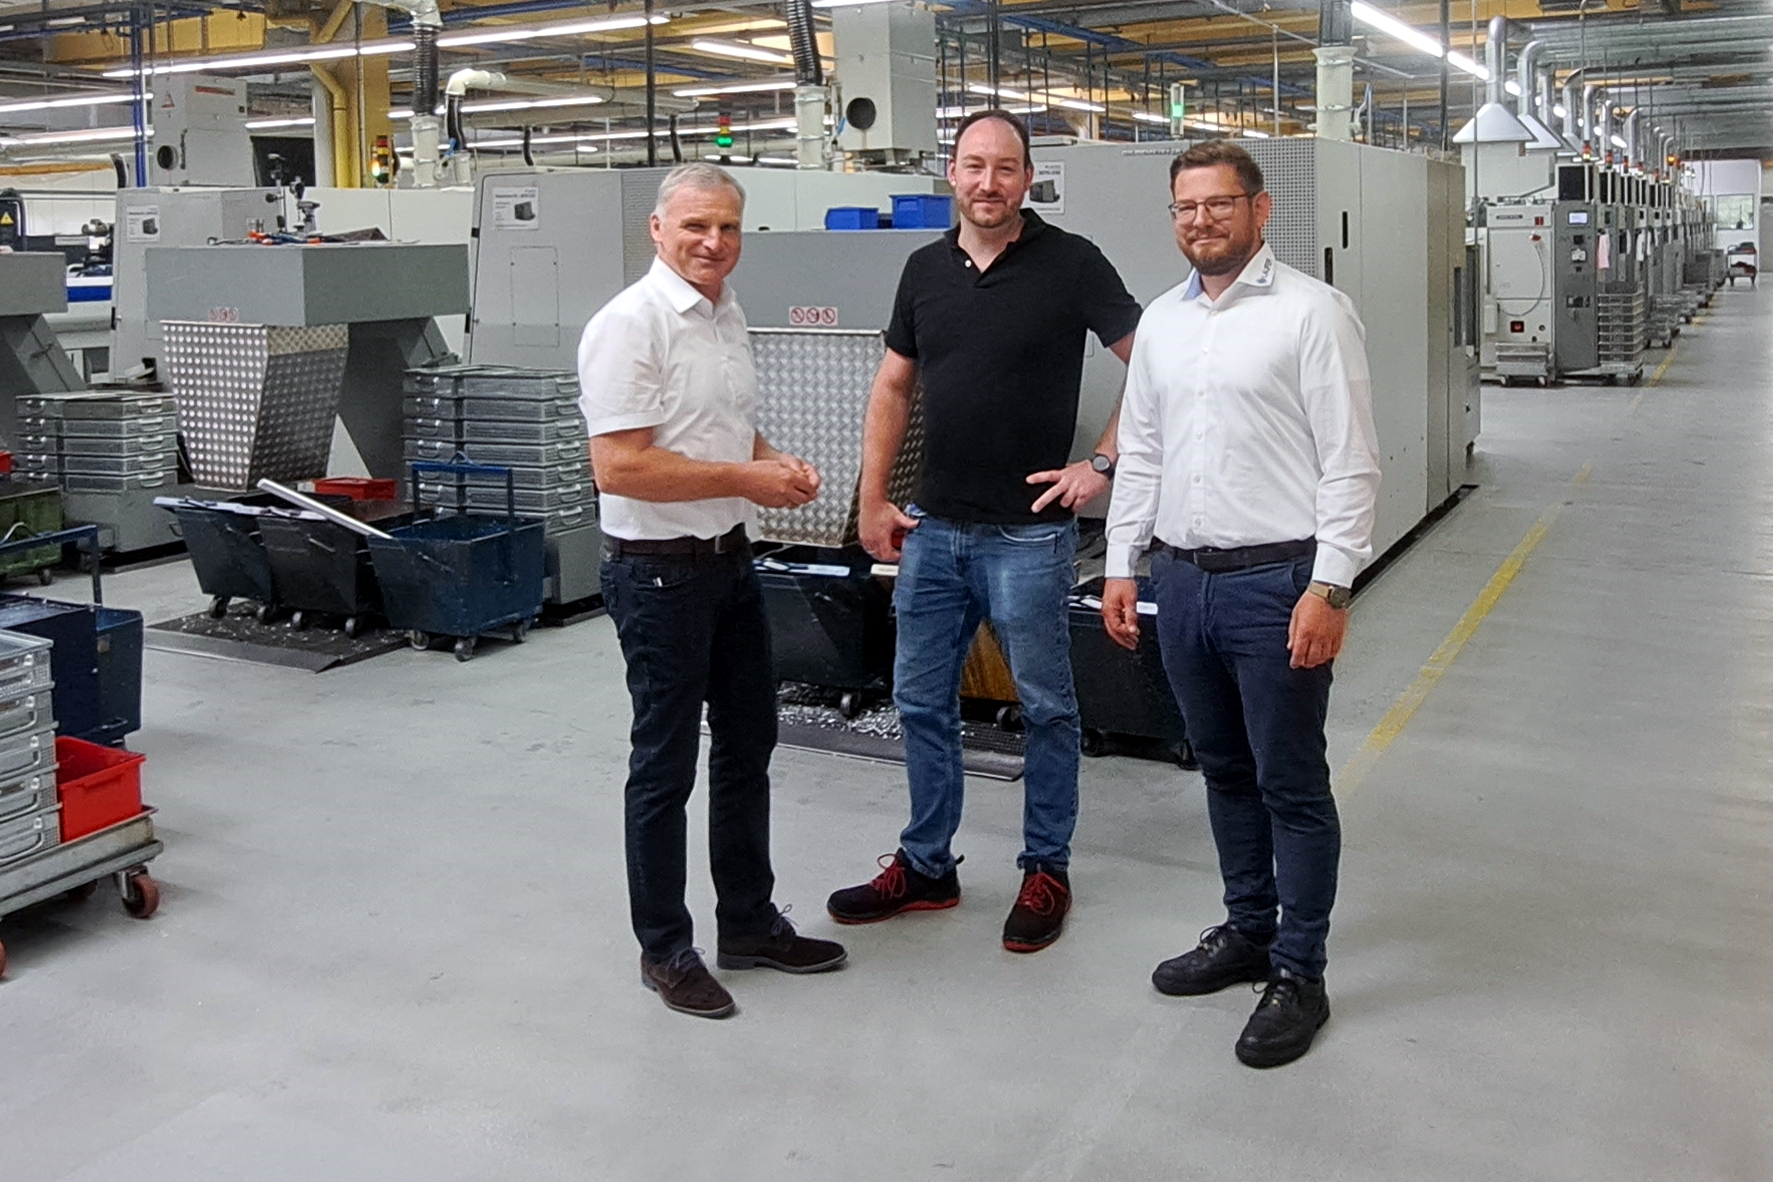 From right: Anton Abermeth (Technical Purchasing, LAUFER), Alexander Efinger (Team Leader CNC Single Spindle, LAUFER), Karl-Heinz Pfenning (Head of Form Grooving Tools, Dieterle)